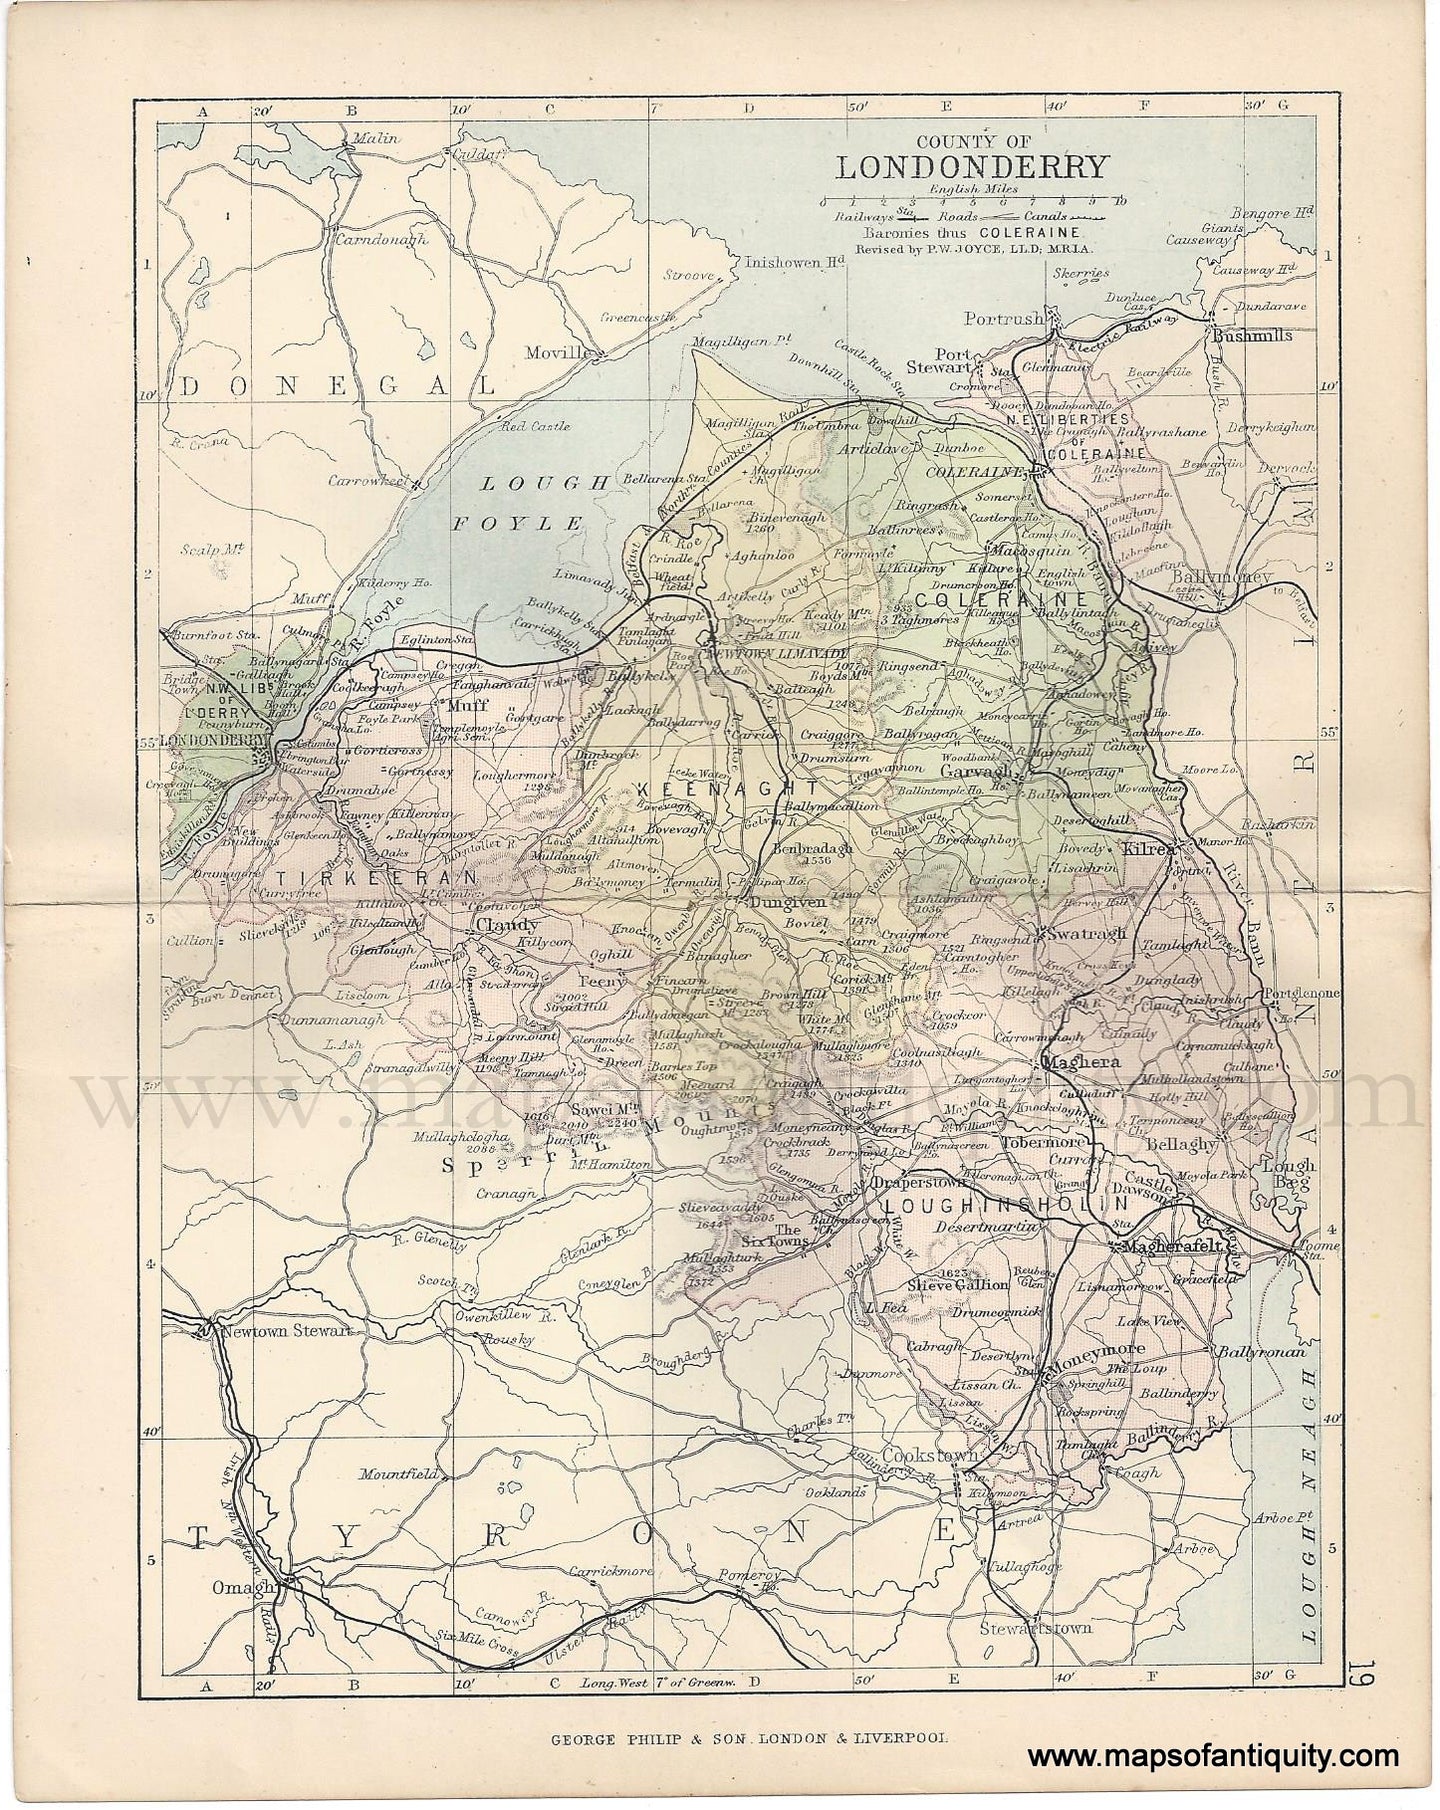 Genuine-Antique-Map-Ireland-County-of-Londonderry-1884-George-Philip-&-Son-Maps-Of-Antiquity